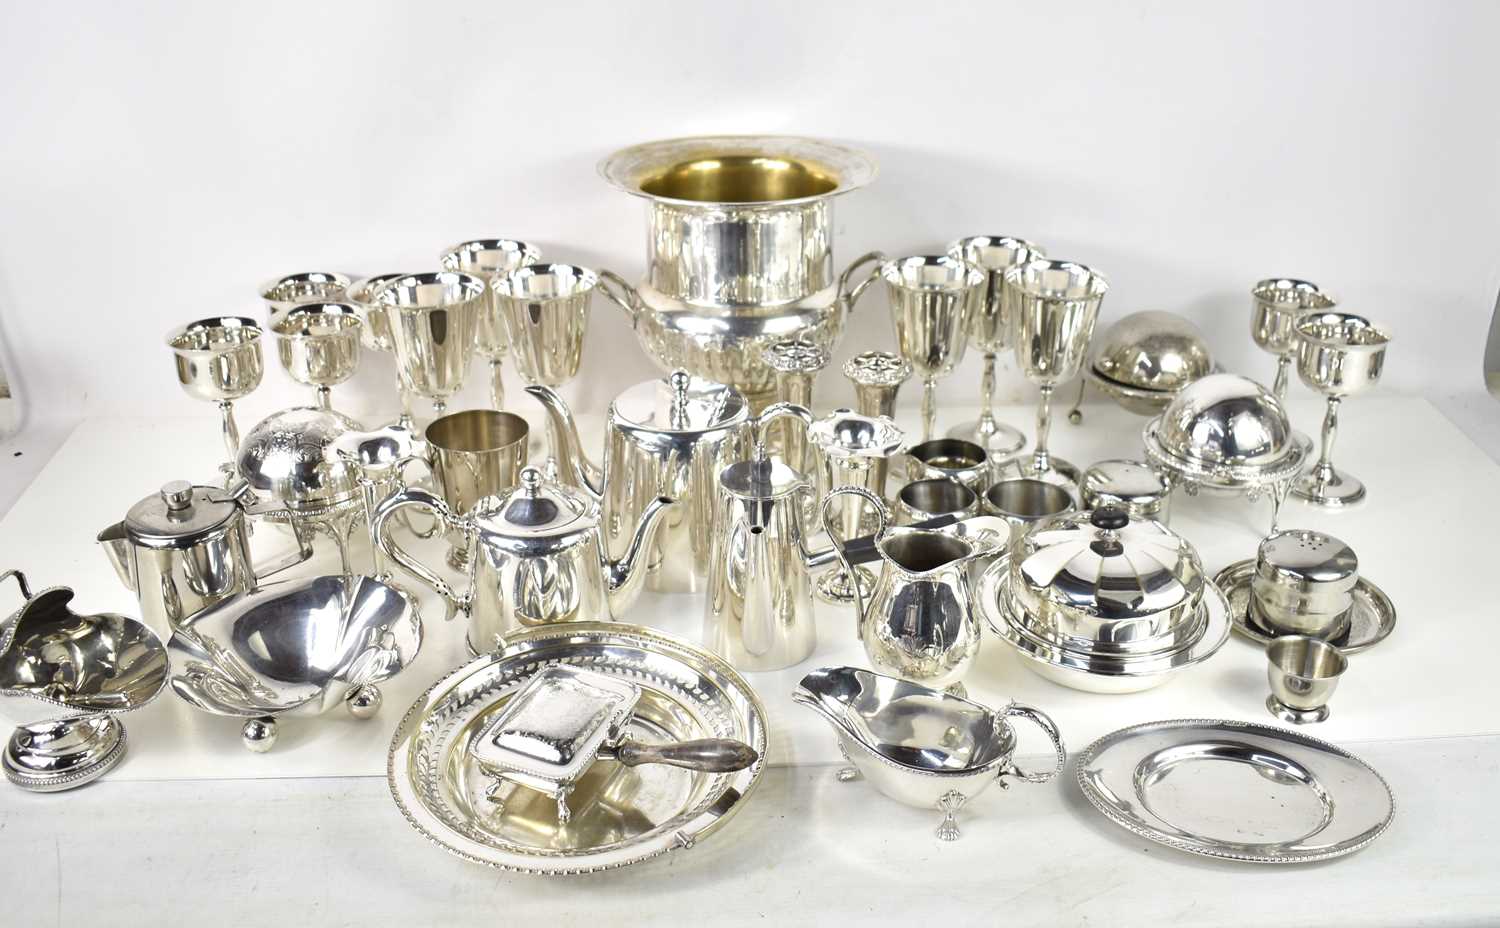 A large collection of silver plate including a chocolate pot, set of six goblets and six smaller